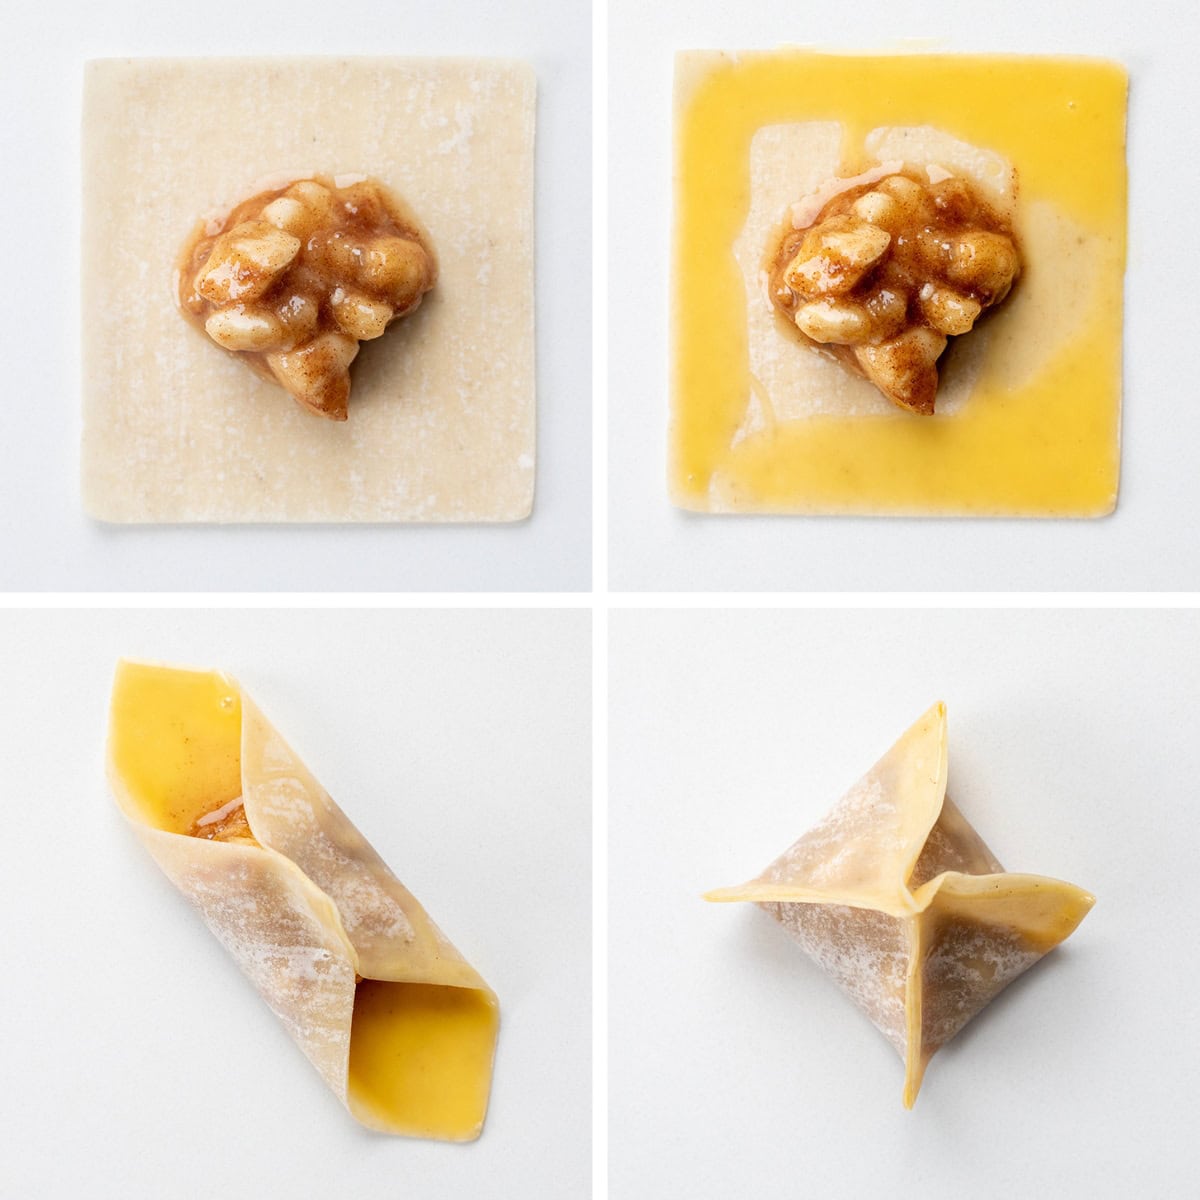 Steps for making Fried Banana Bites with wonton wrappers and banana filling.